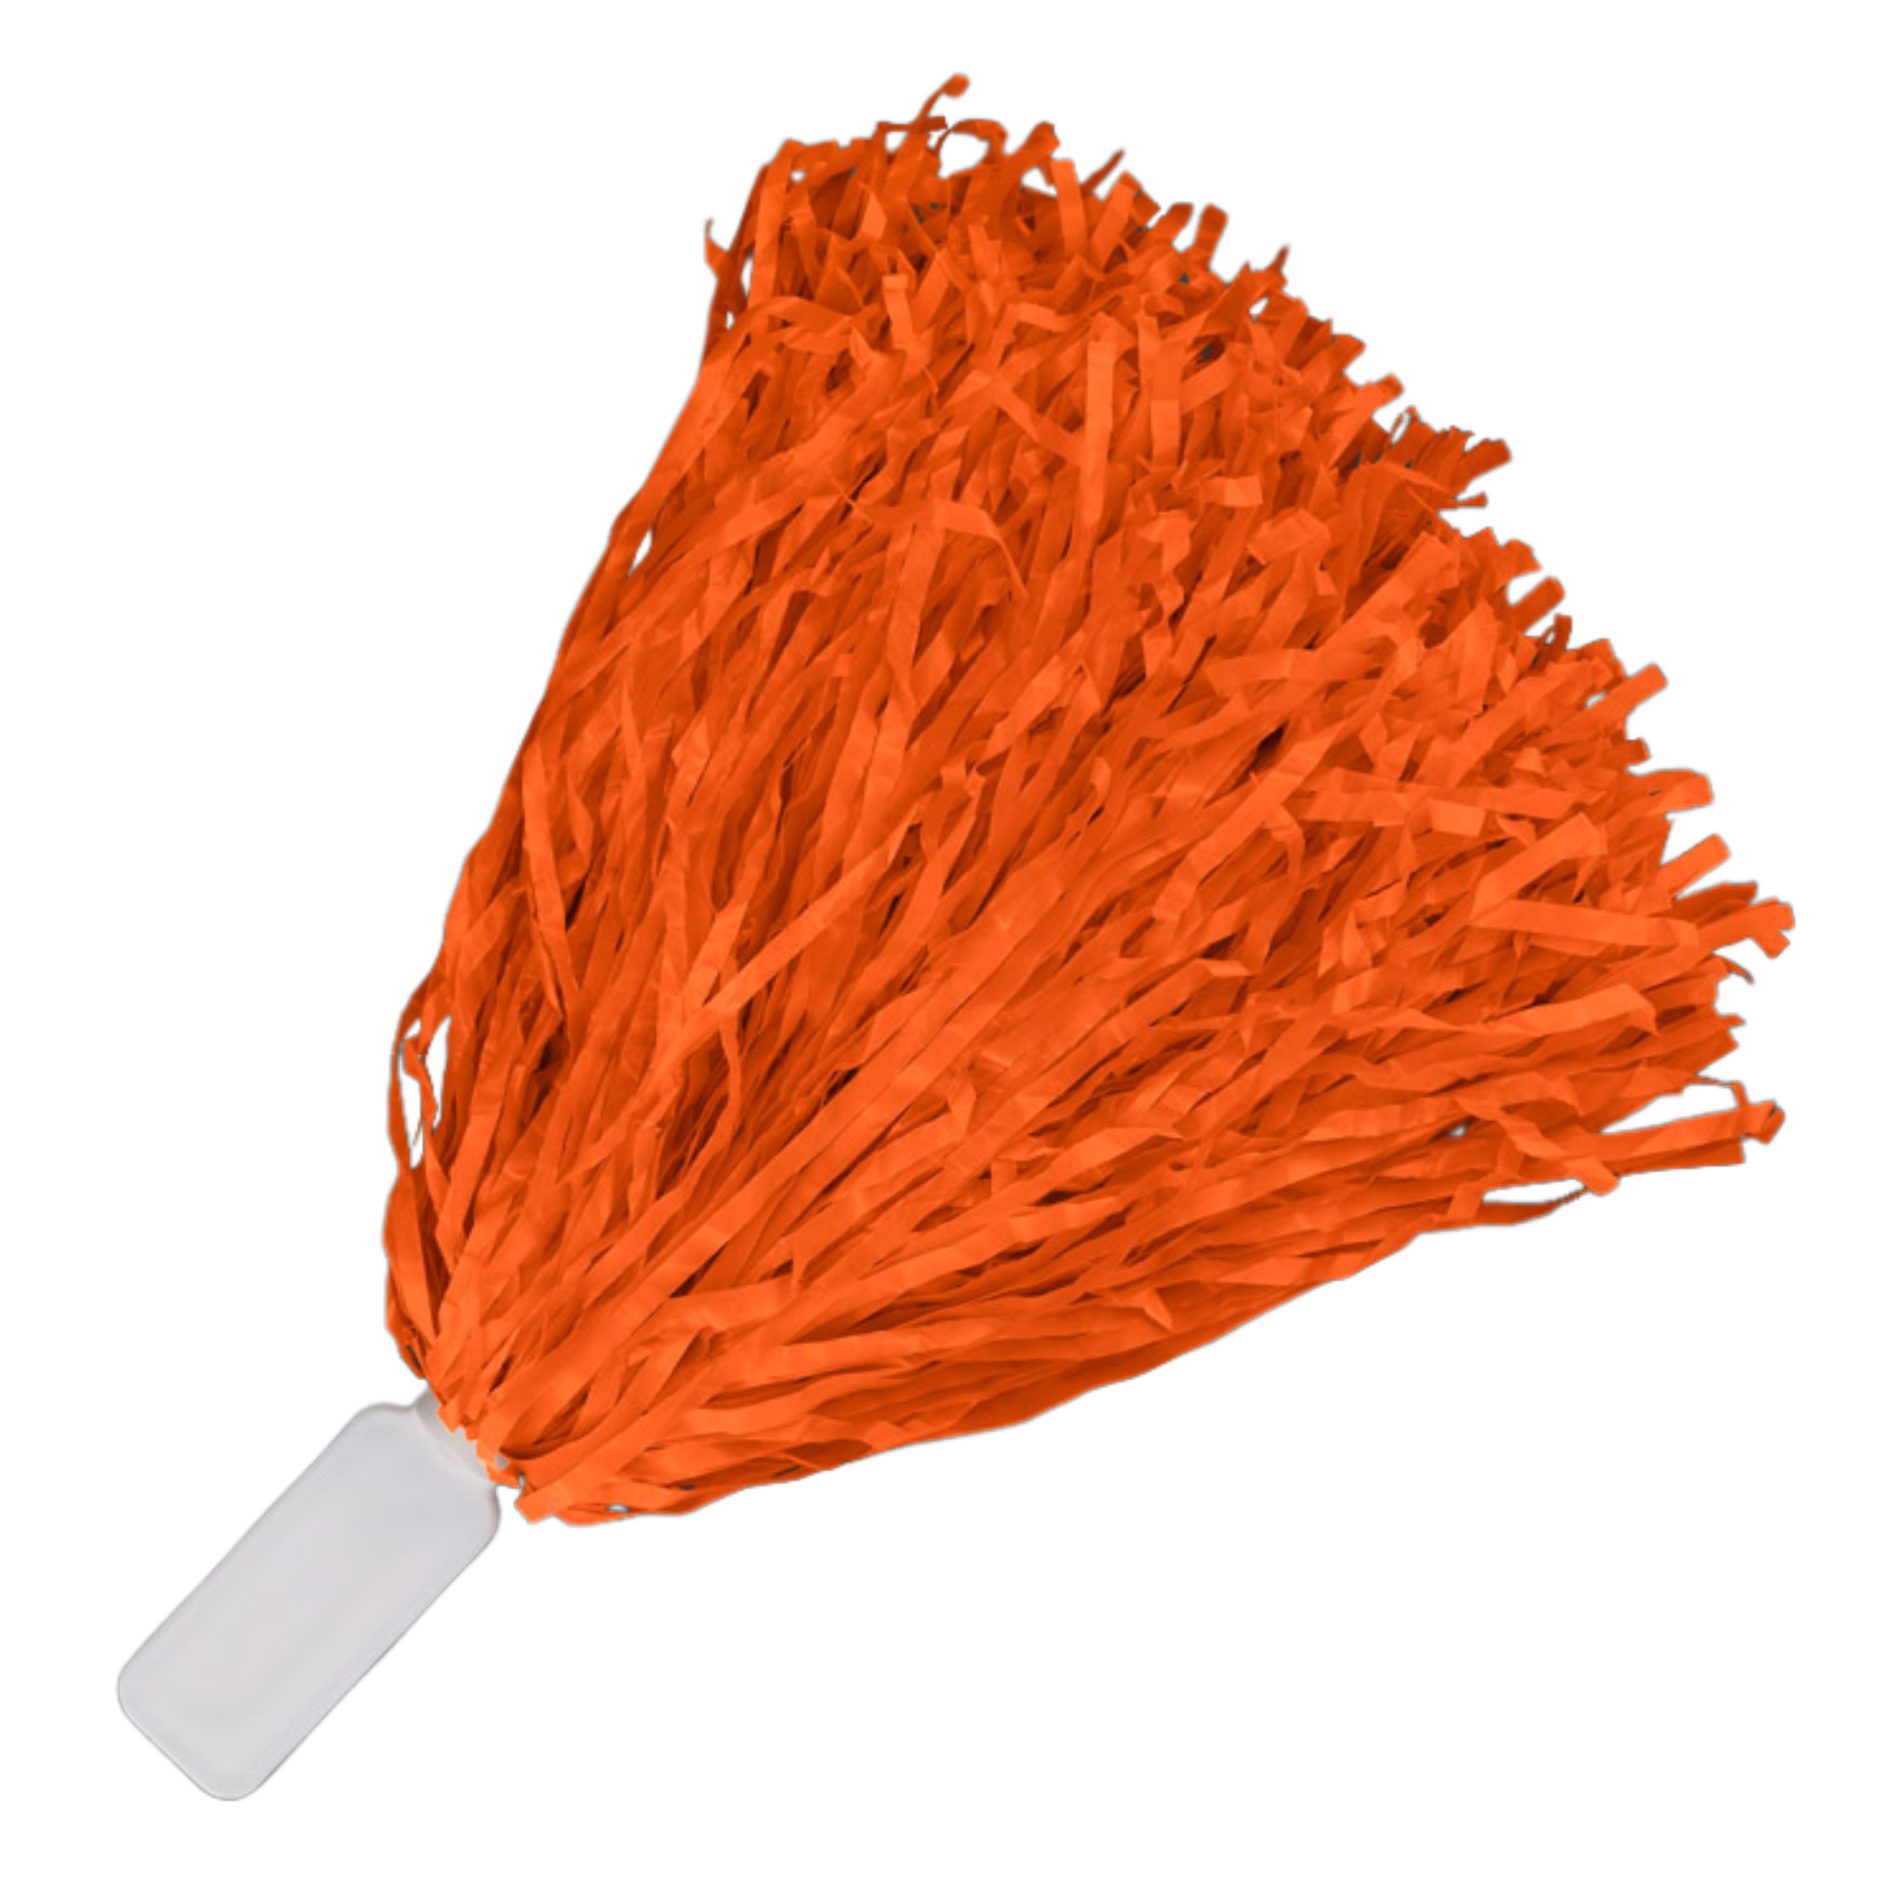 Non Light Up Short Handle Cheer Pom poms Orange All Products 3